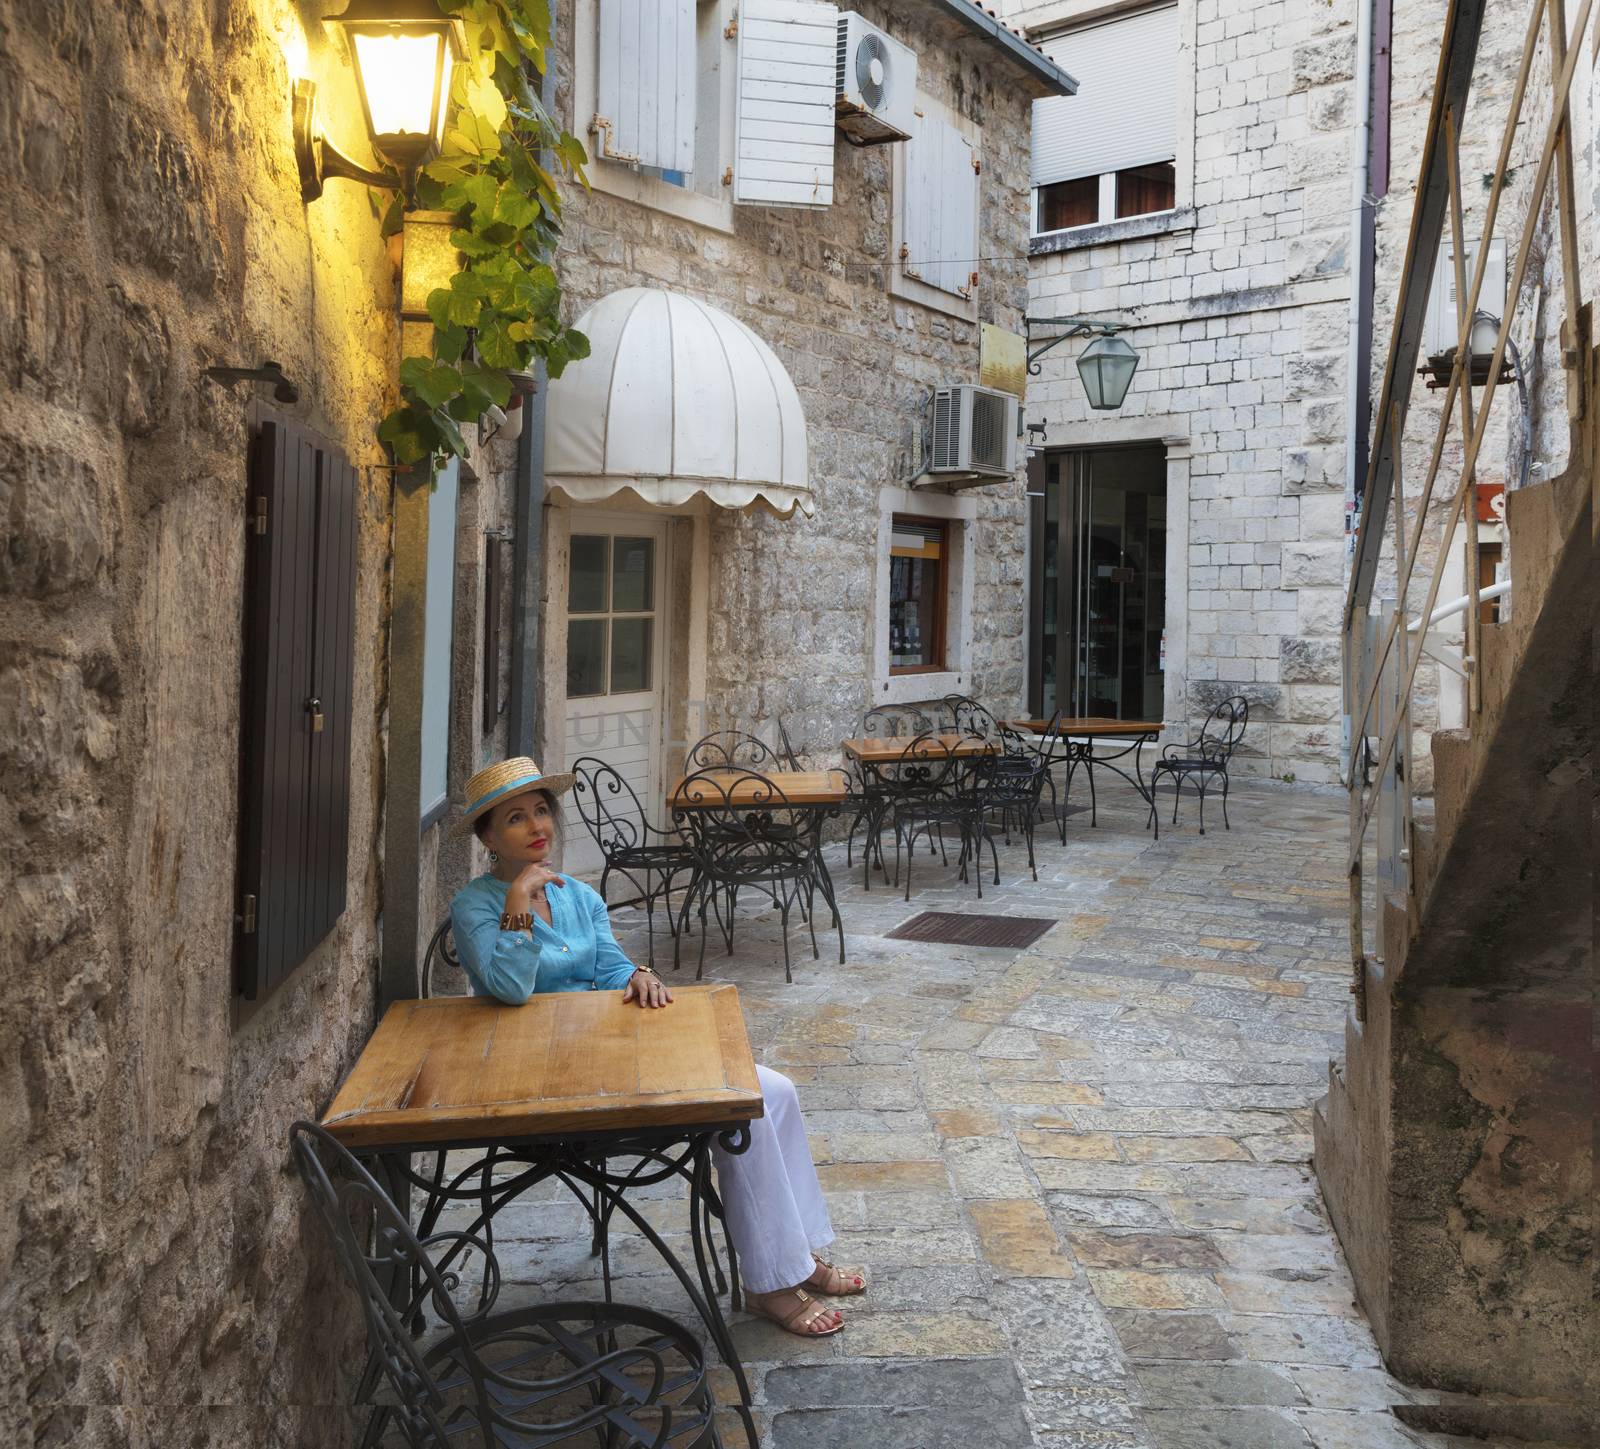 A young woman in a bright turquoise blouse and a straw hat sits at a table of a street cafe in the old town of Budva, Montenegro